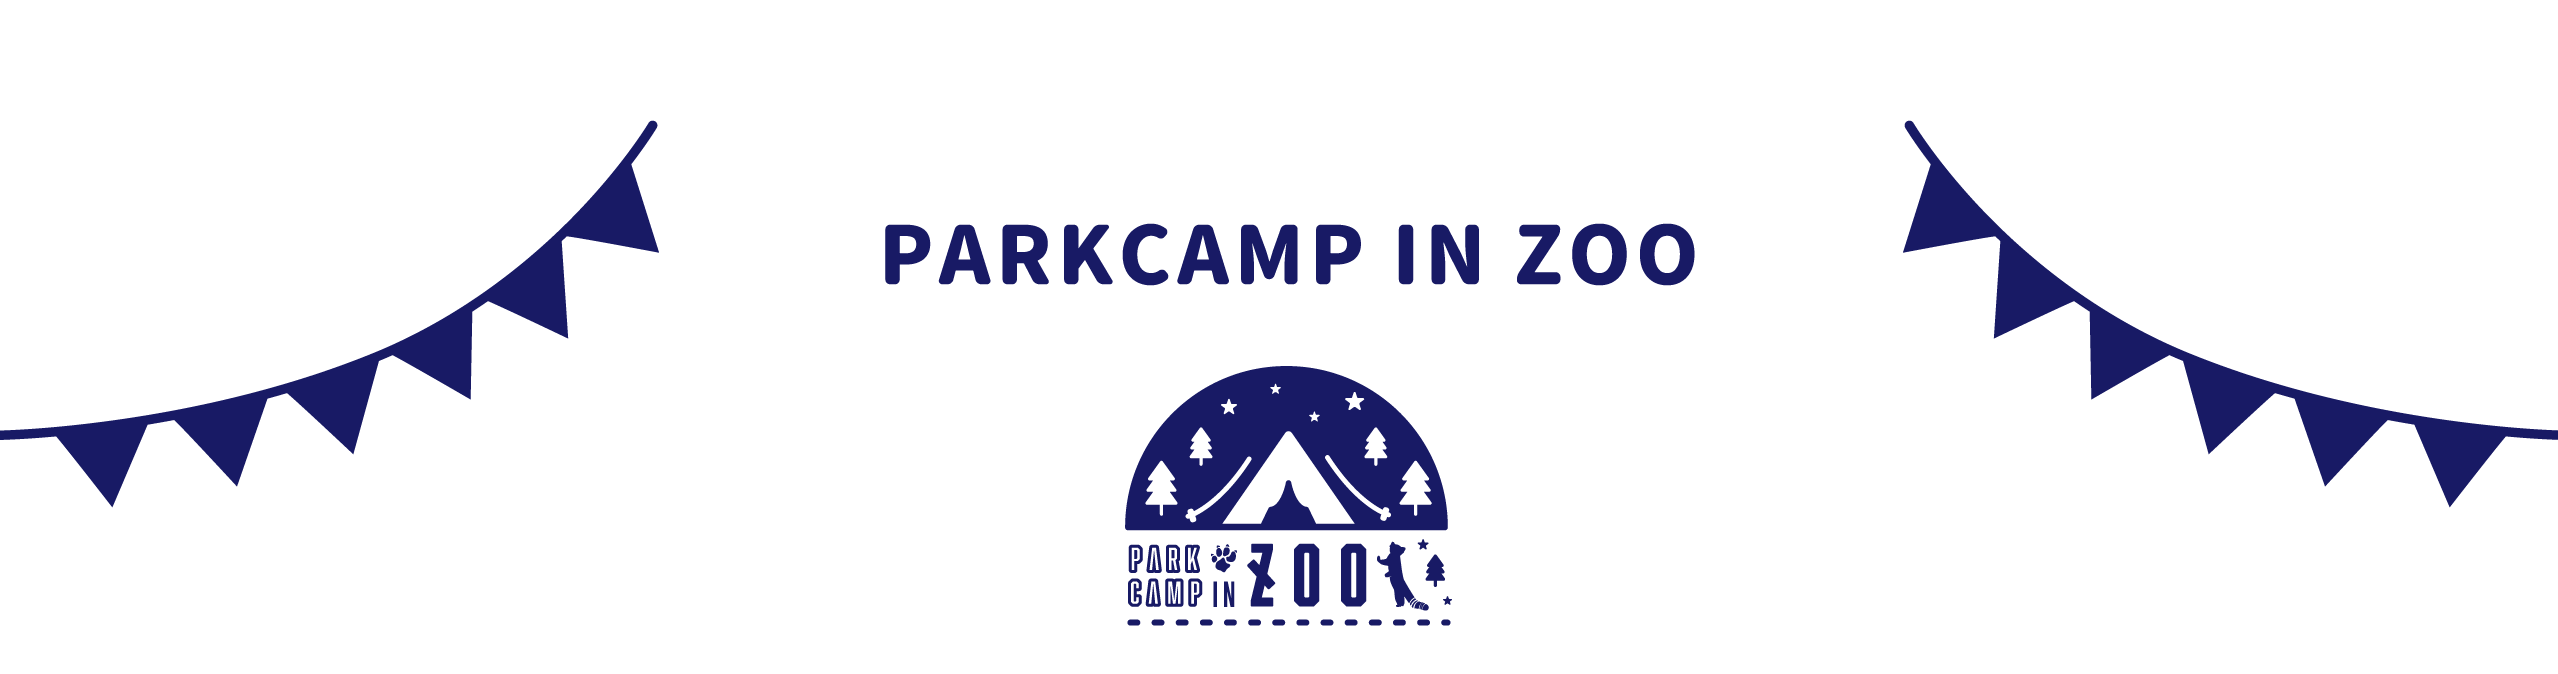 PARKCAMP IN ZOO